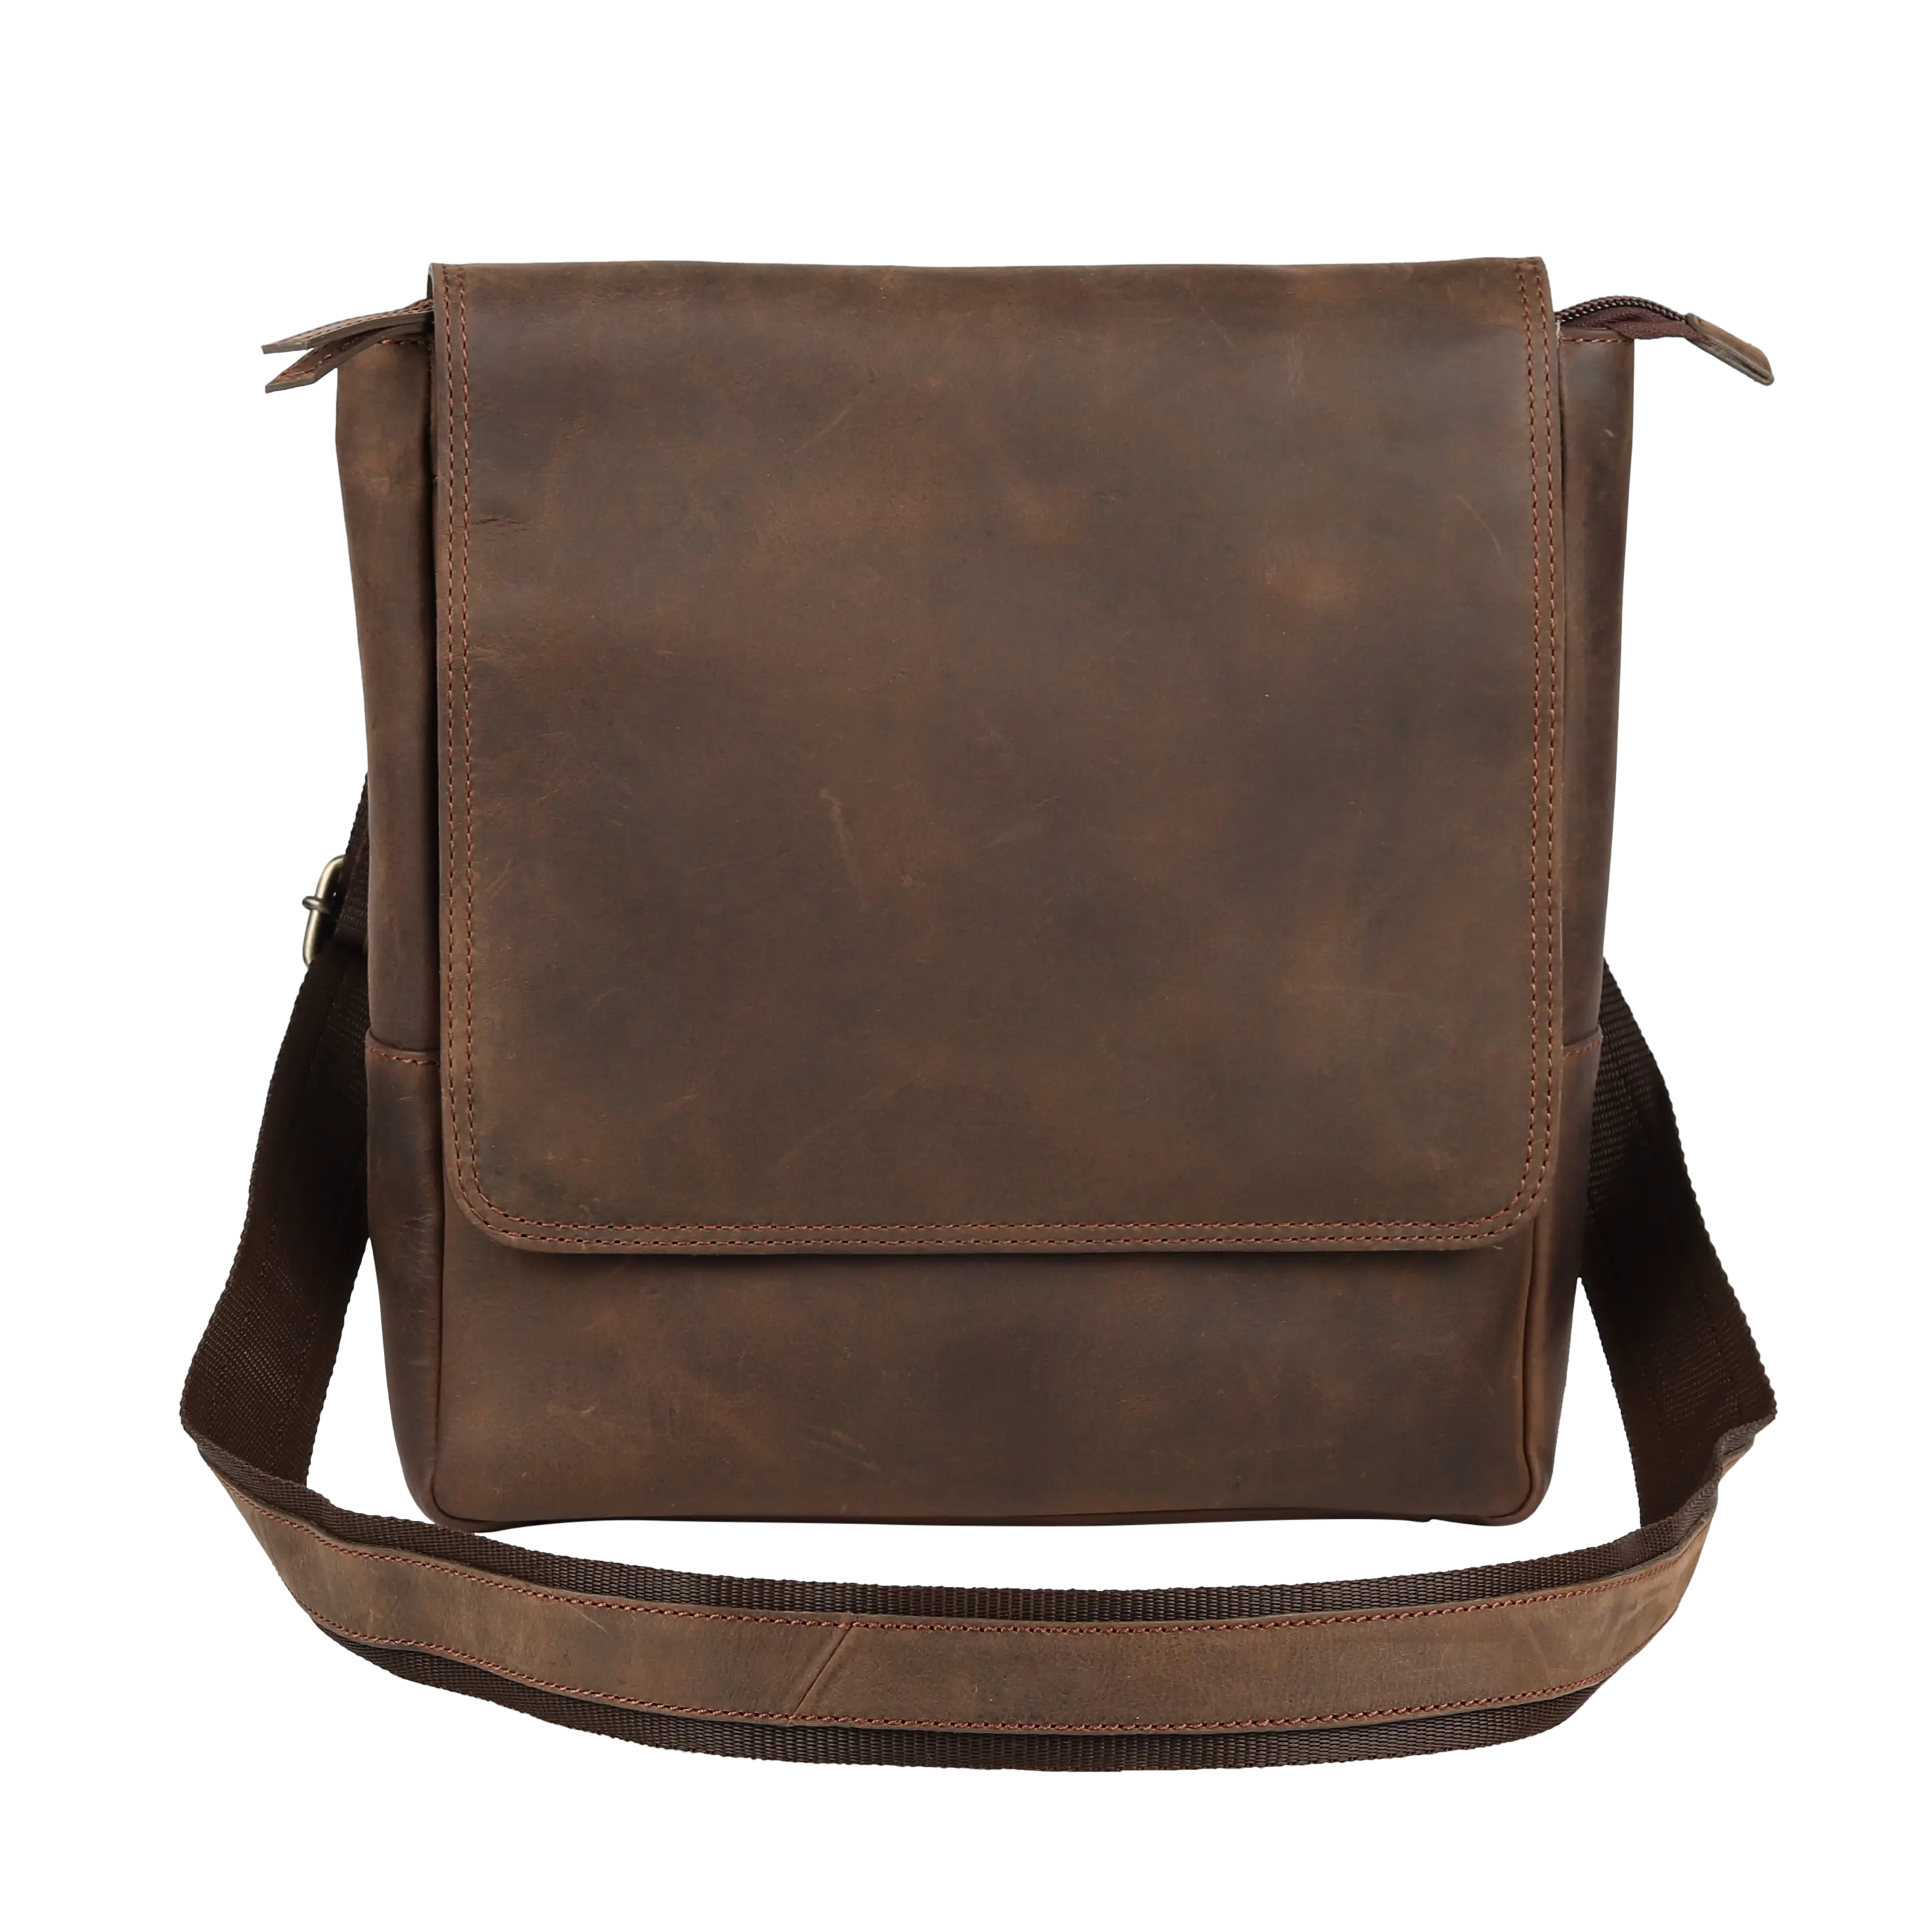 BOL/Open Road Hunter Leather Messanger Bag Backpacks & Messenger Bags Boutique of Leathers/Open Road